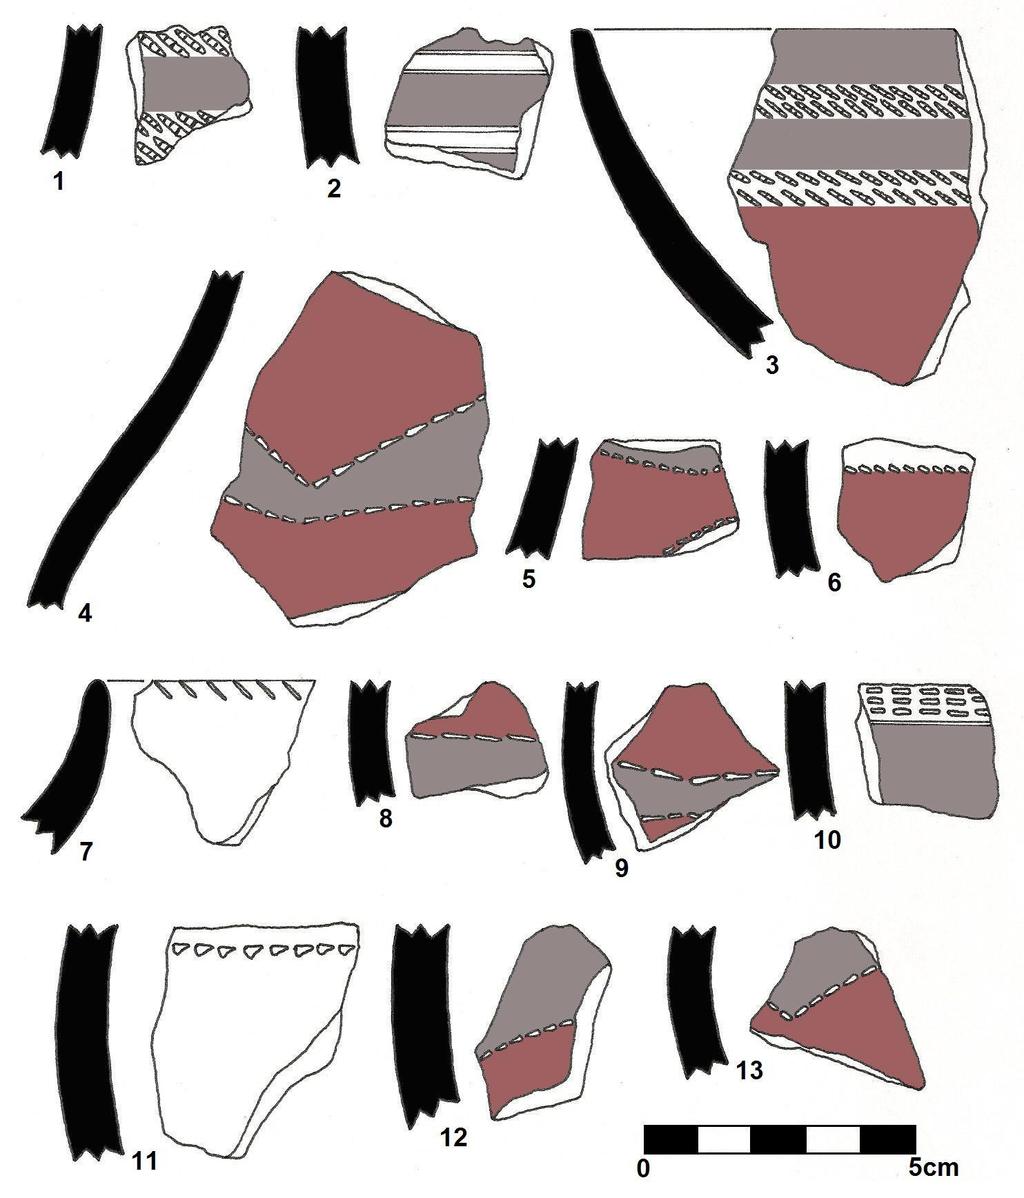 Figure 8: Profiles and sketches of decorated vessels from early Moloko sites (Jars #1&2 and bowl #3) and from Letsibogo sites including site 12